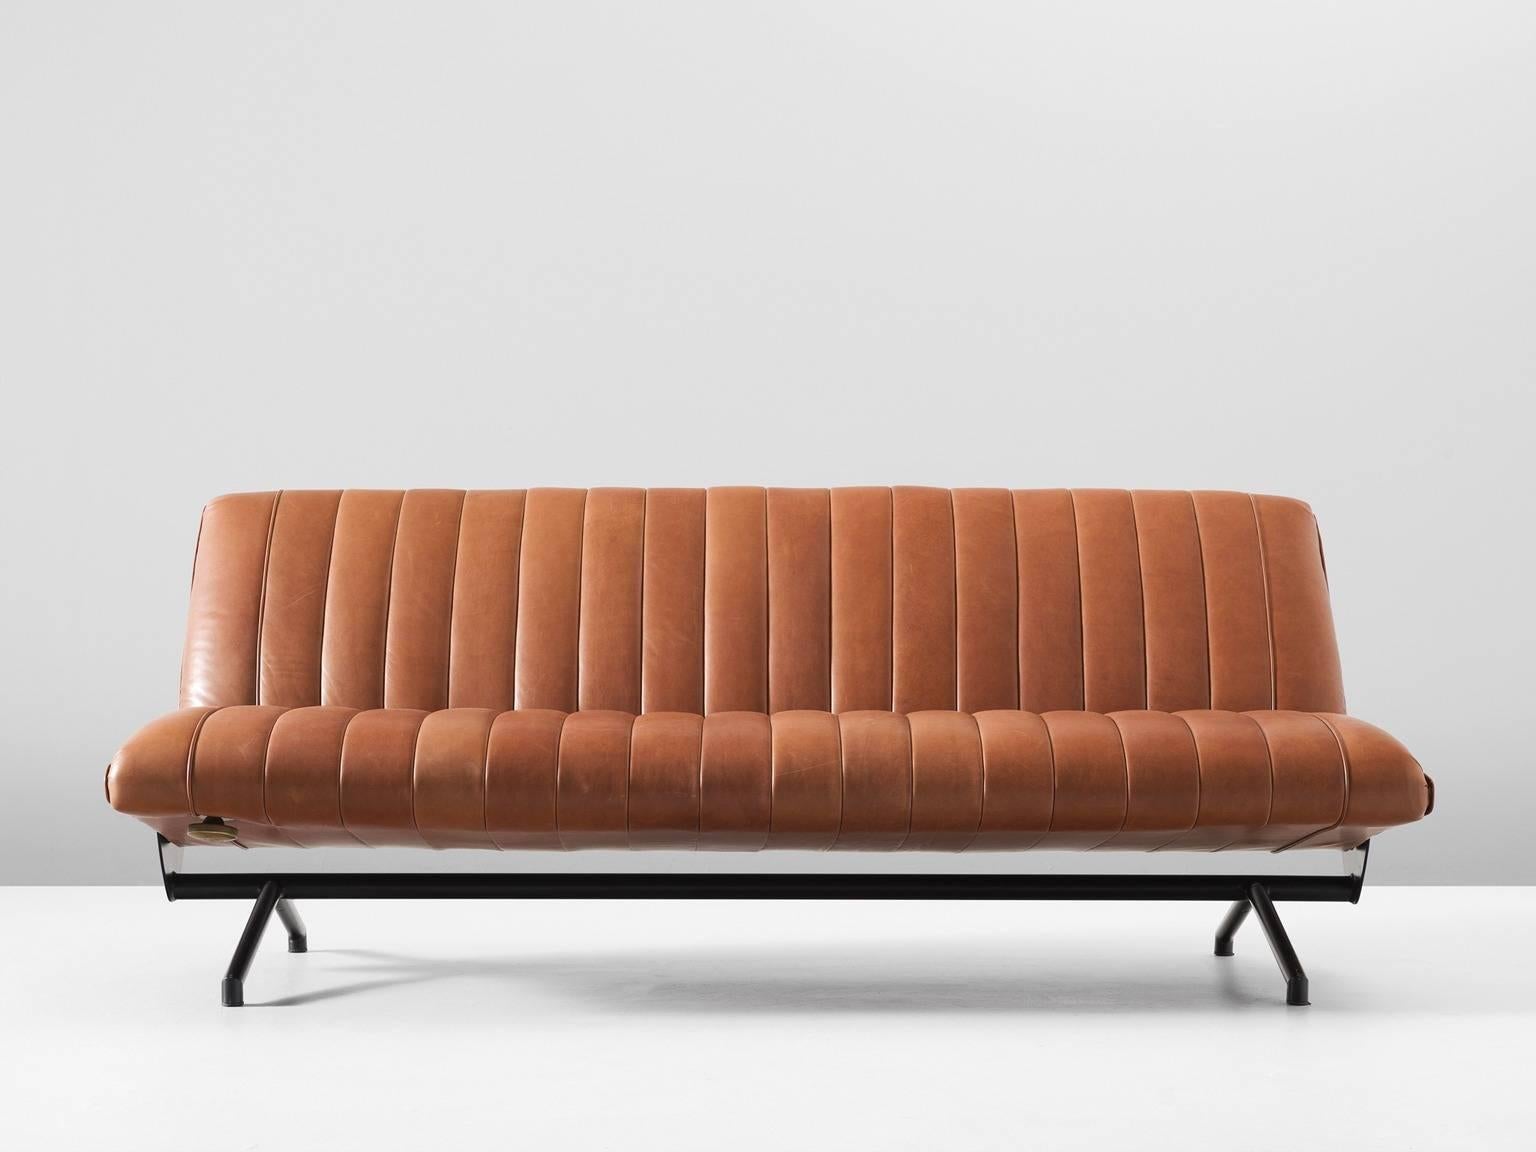 Osvaldo Borsani for Tecno, sofa model D70, in cognac leather, metal and brass, Italy, 1954. 

This iconic sofa by Italian designer Osvaldo Borsani is reupholstered in high-quality brown leather. The vertical stripes of the leather seating remind